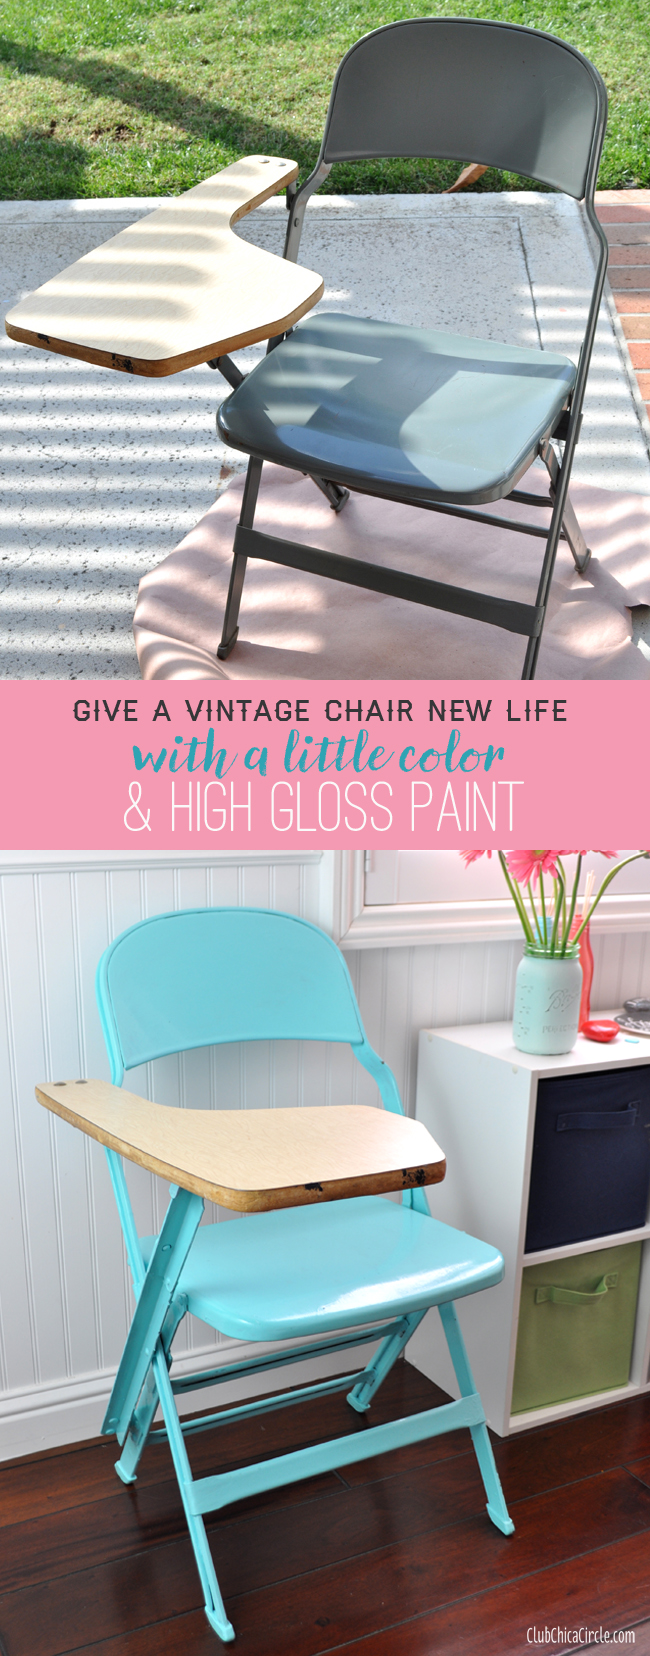 Give a vintage chair a new look with color and high gloss paint